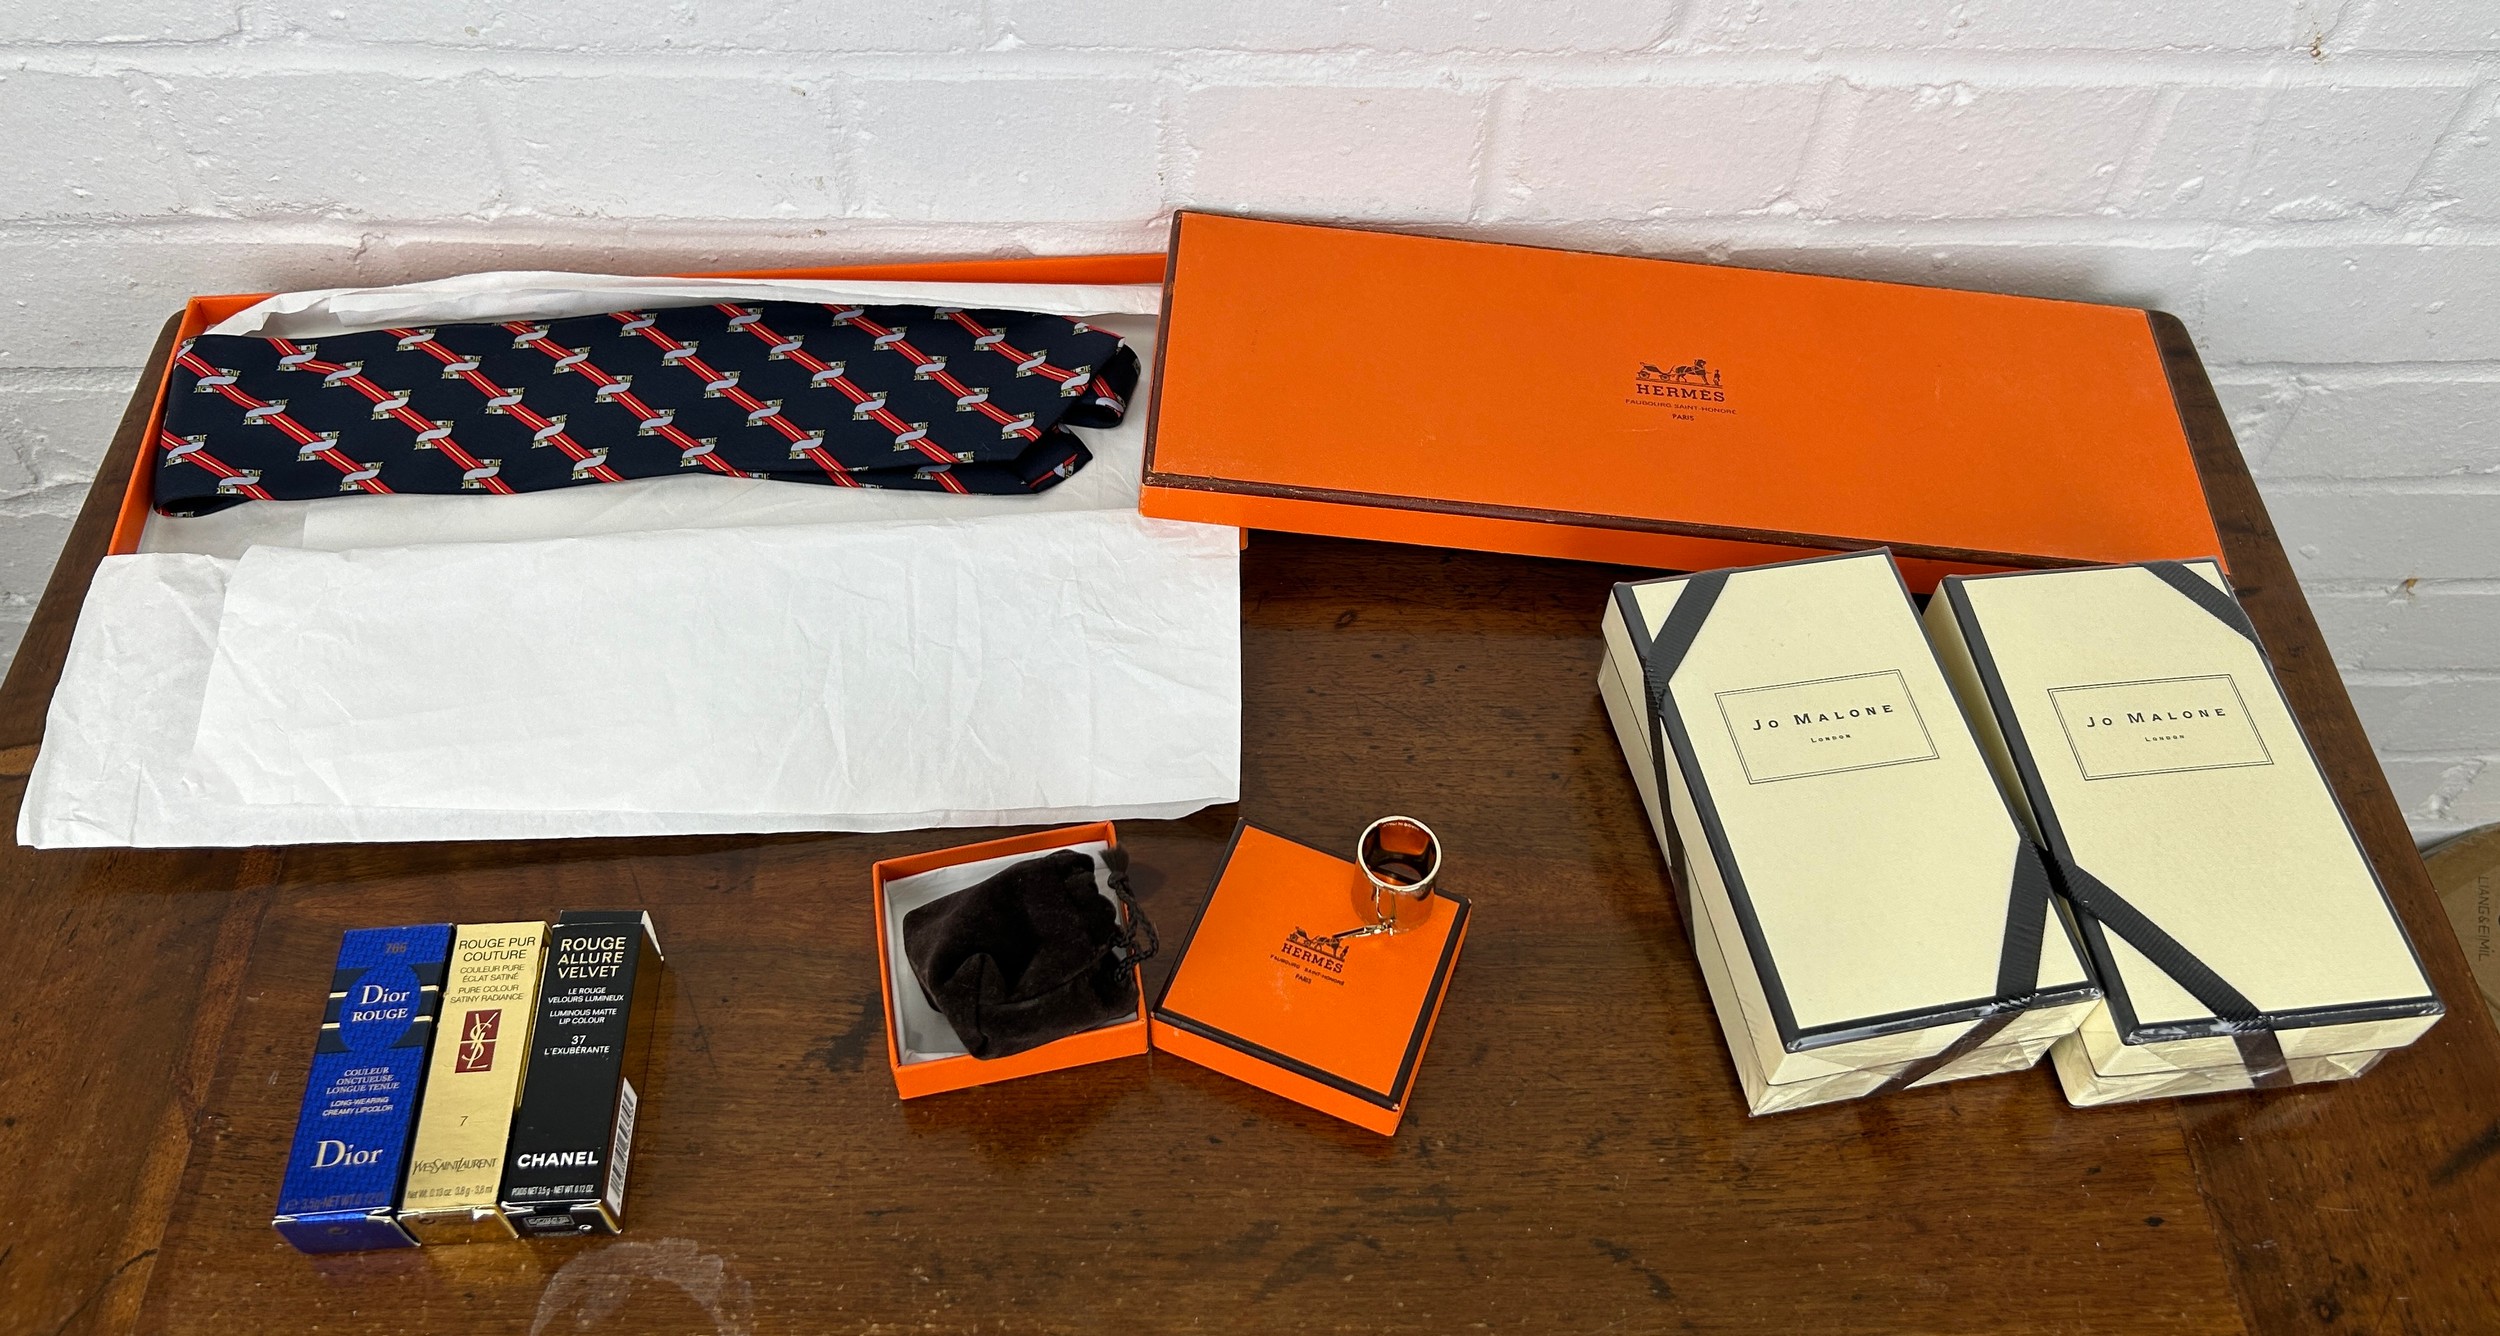 AN HERMES GENTLEMANS TIE AND SCARF ALONG WITH A SCARF RING, JO MALONE COLOGNE, DIOR AND CHANEL ITEMS